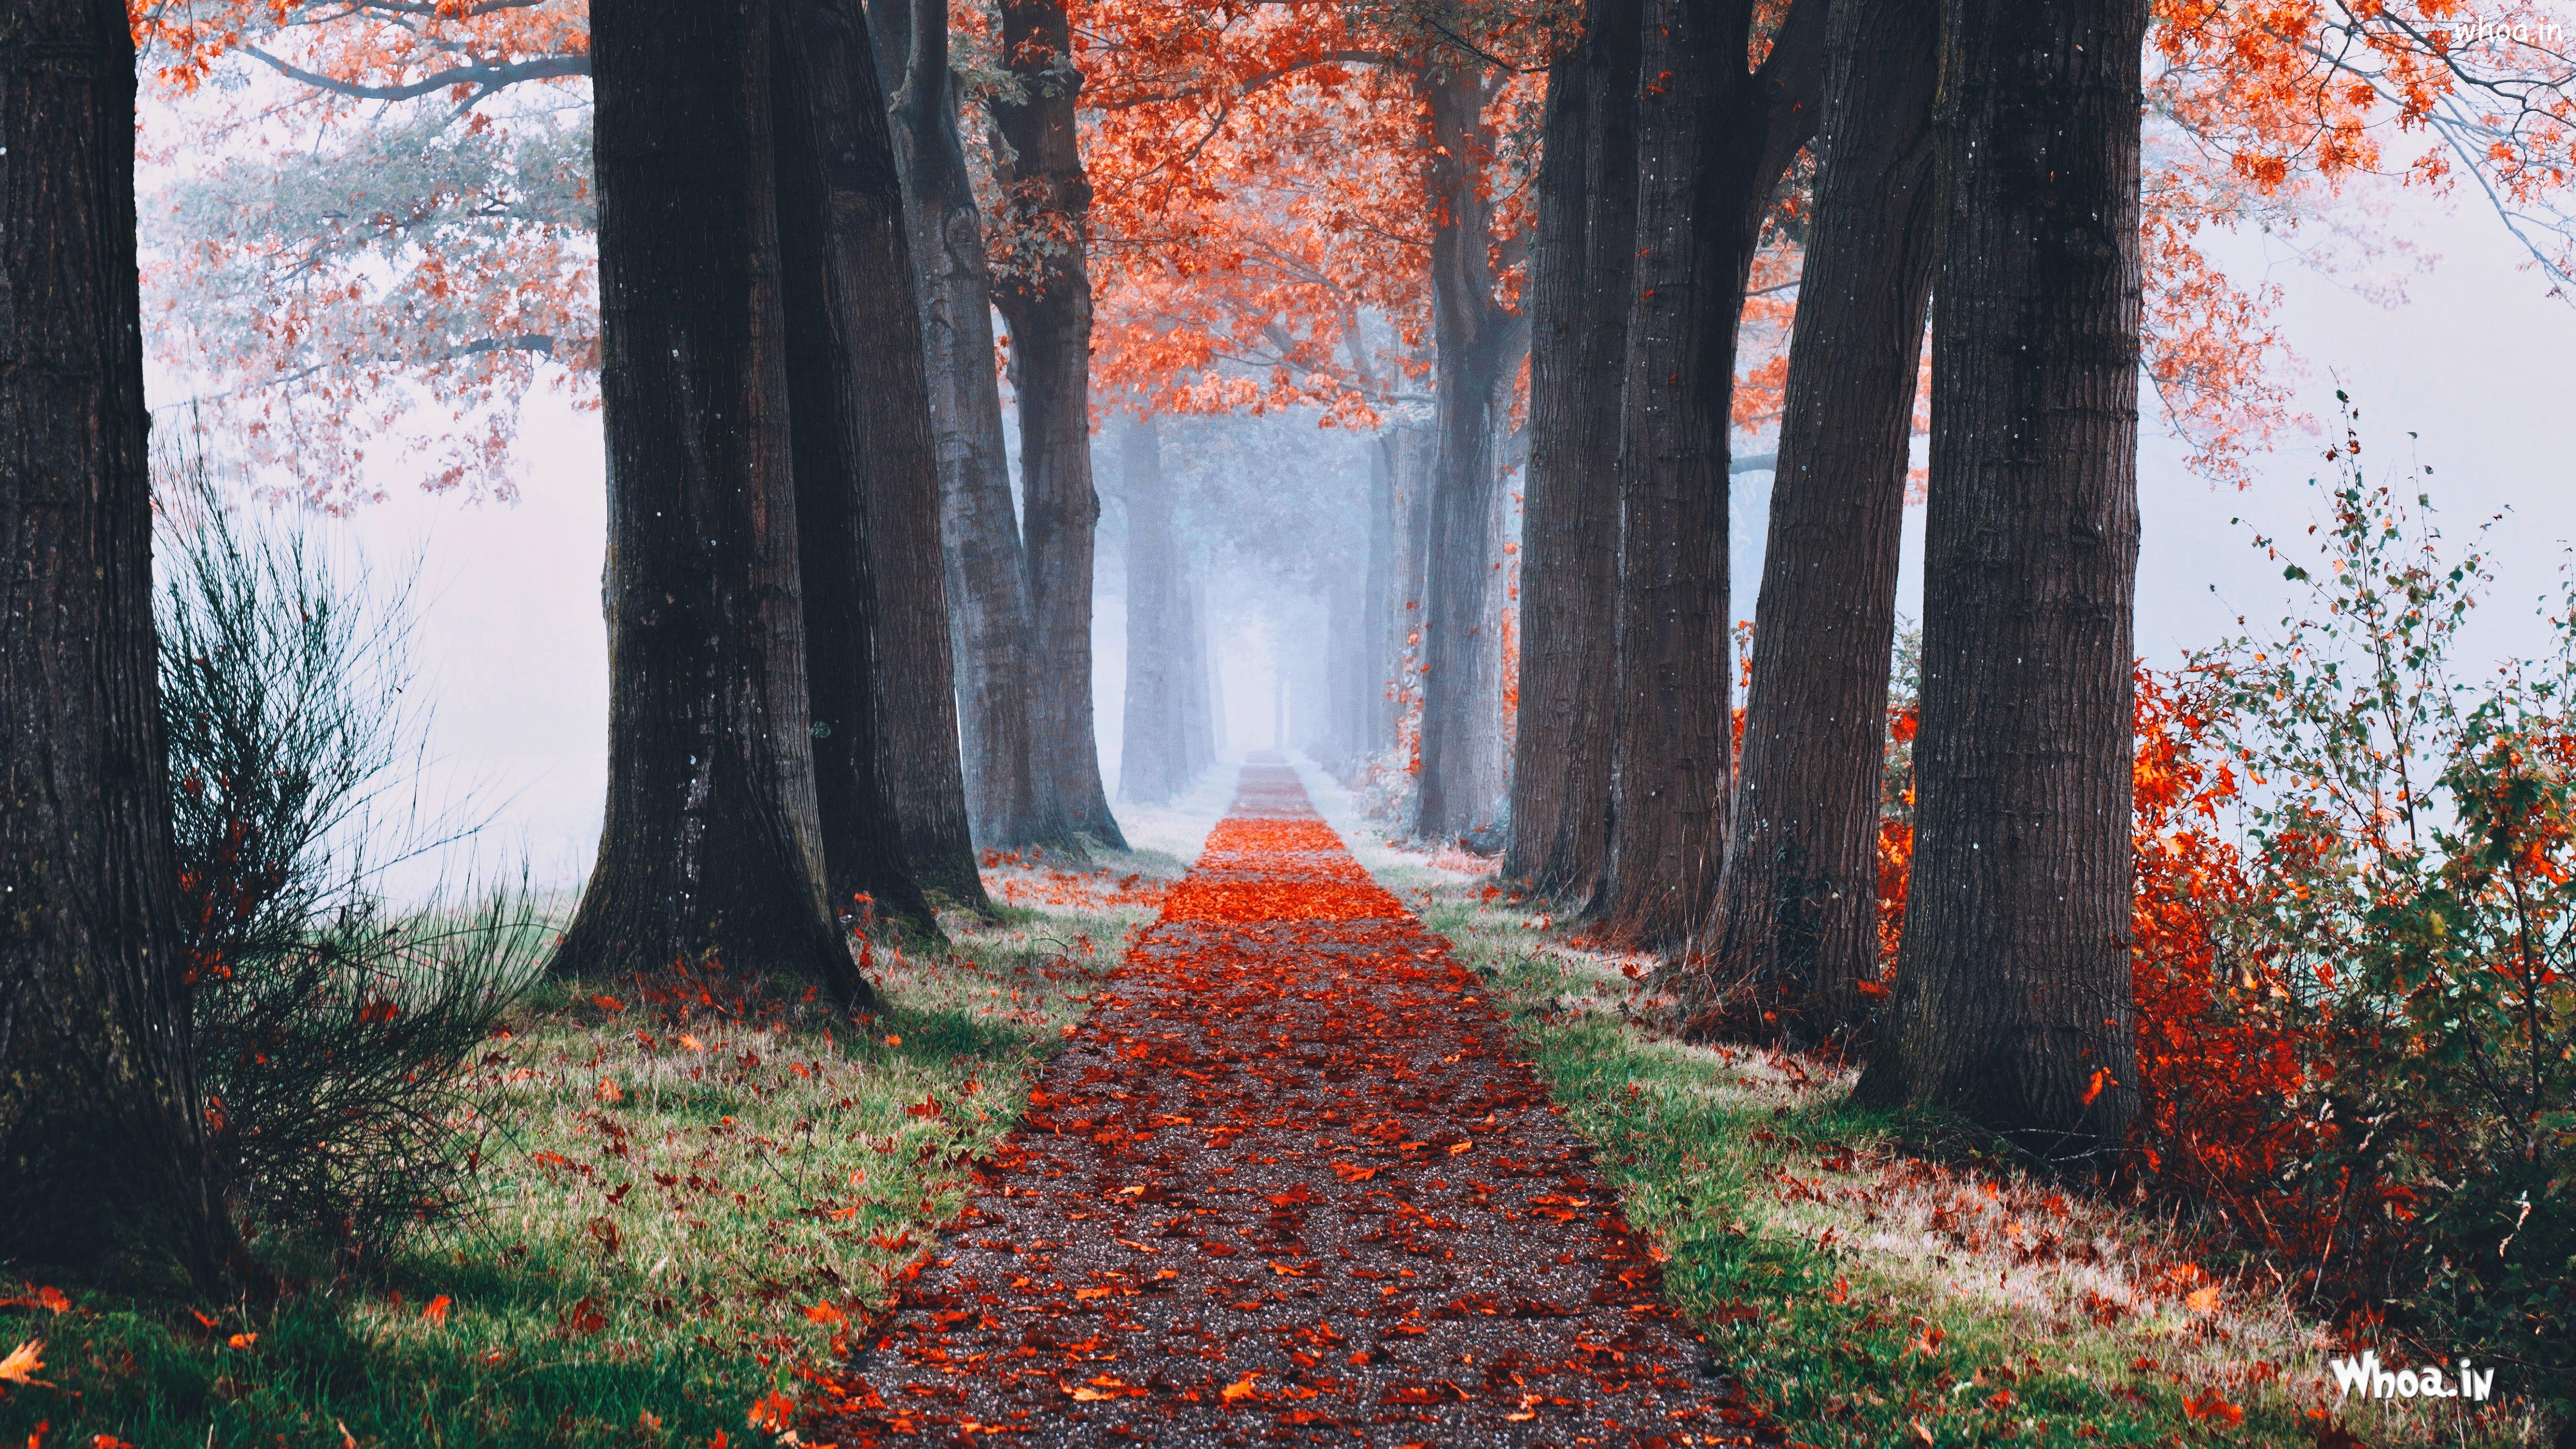 A pathway is surrounded by trees and leaves - Foggy forest